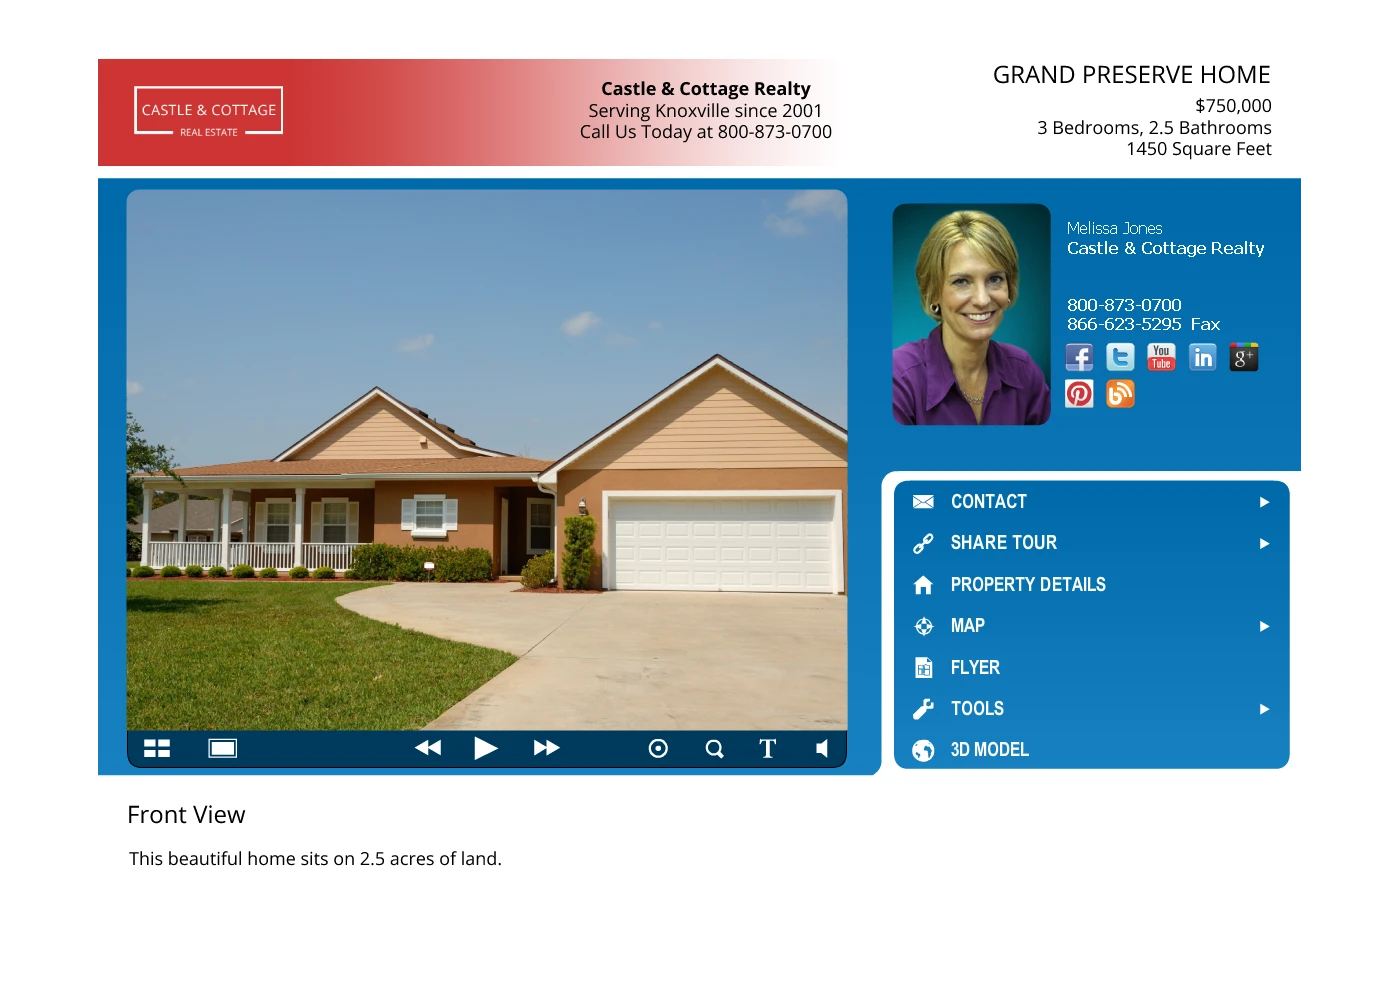 Screenshot of a page showing a home for sale, property details, agent details, and media controls.